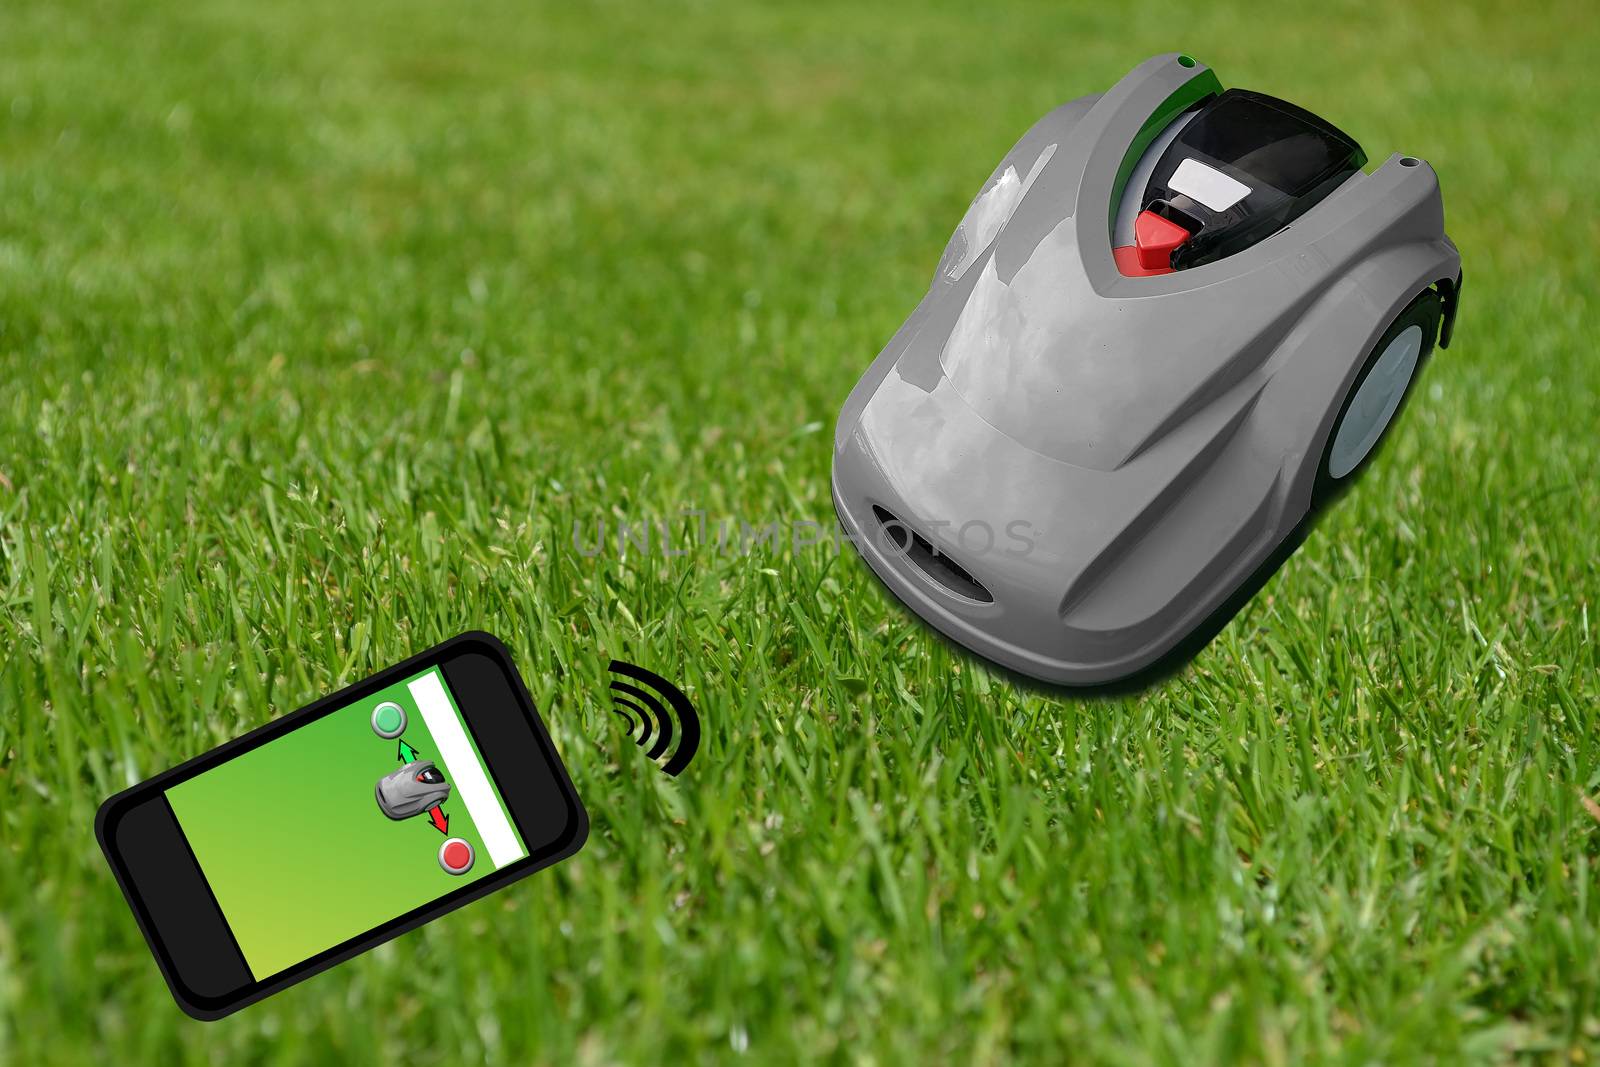 Robot lawn mower on a manicured green lawn. Control with the smartphone